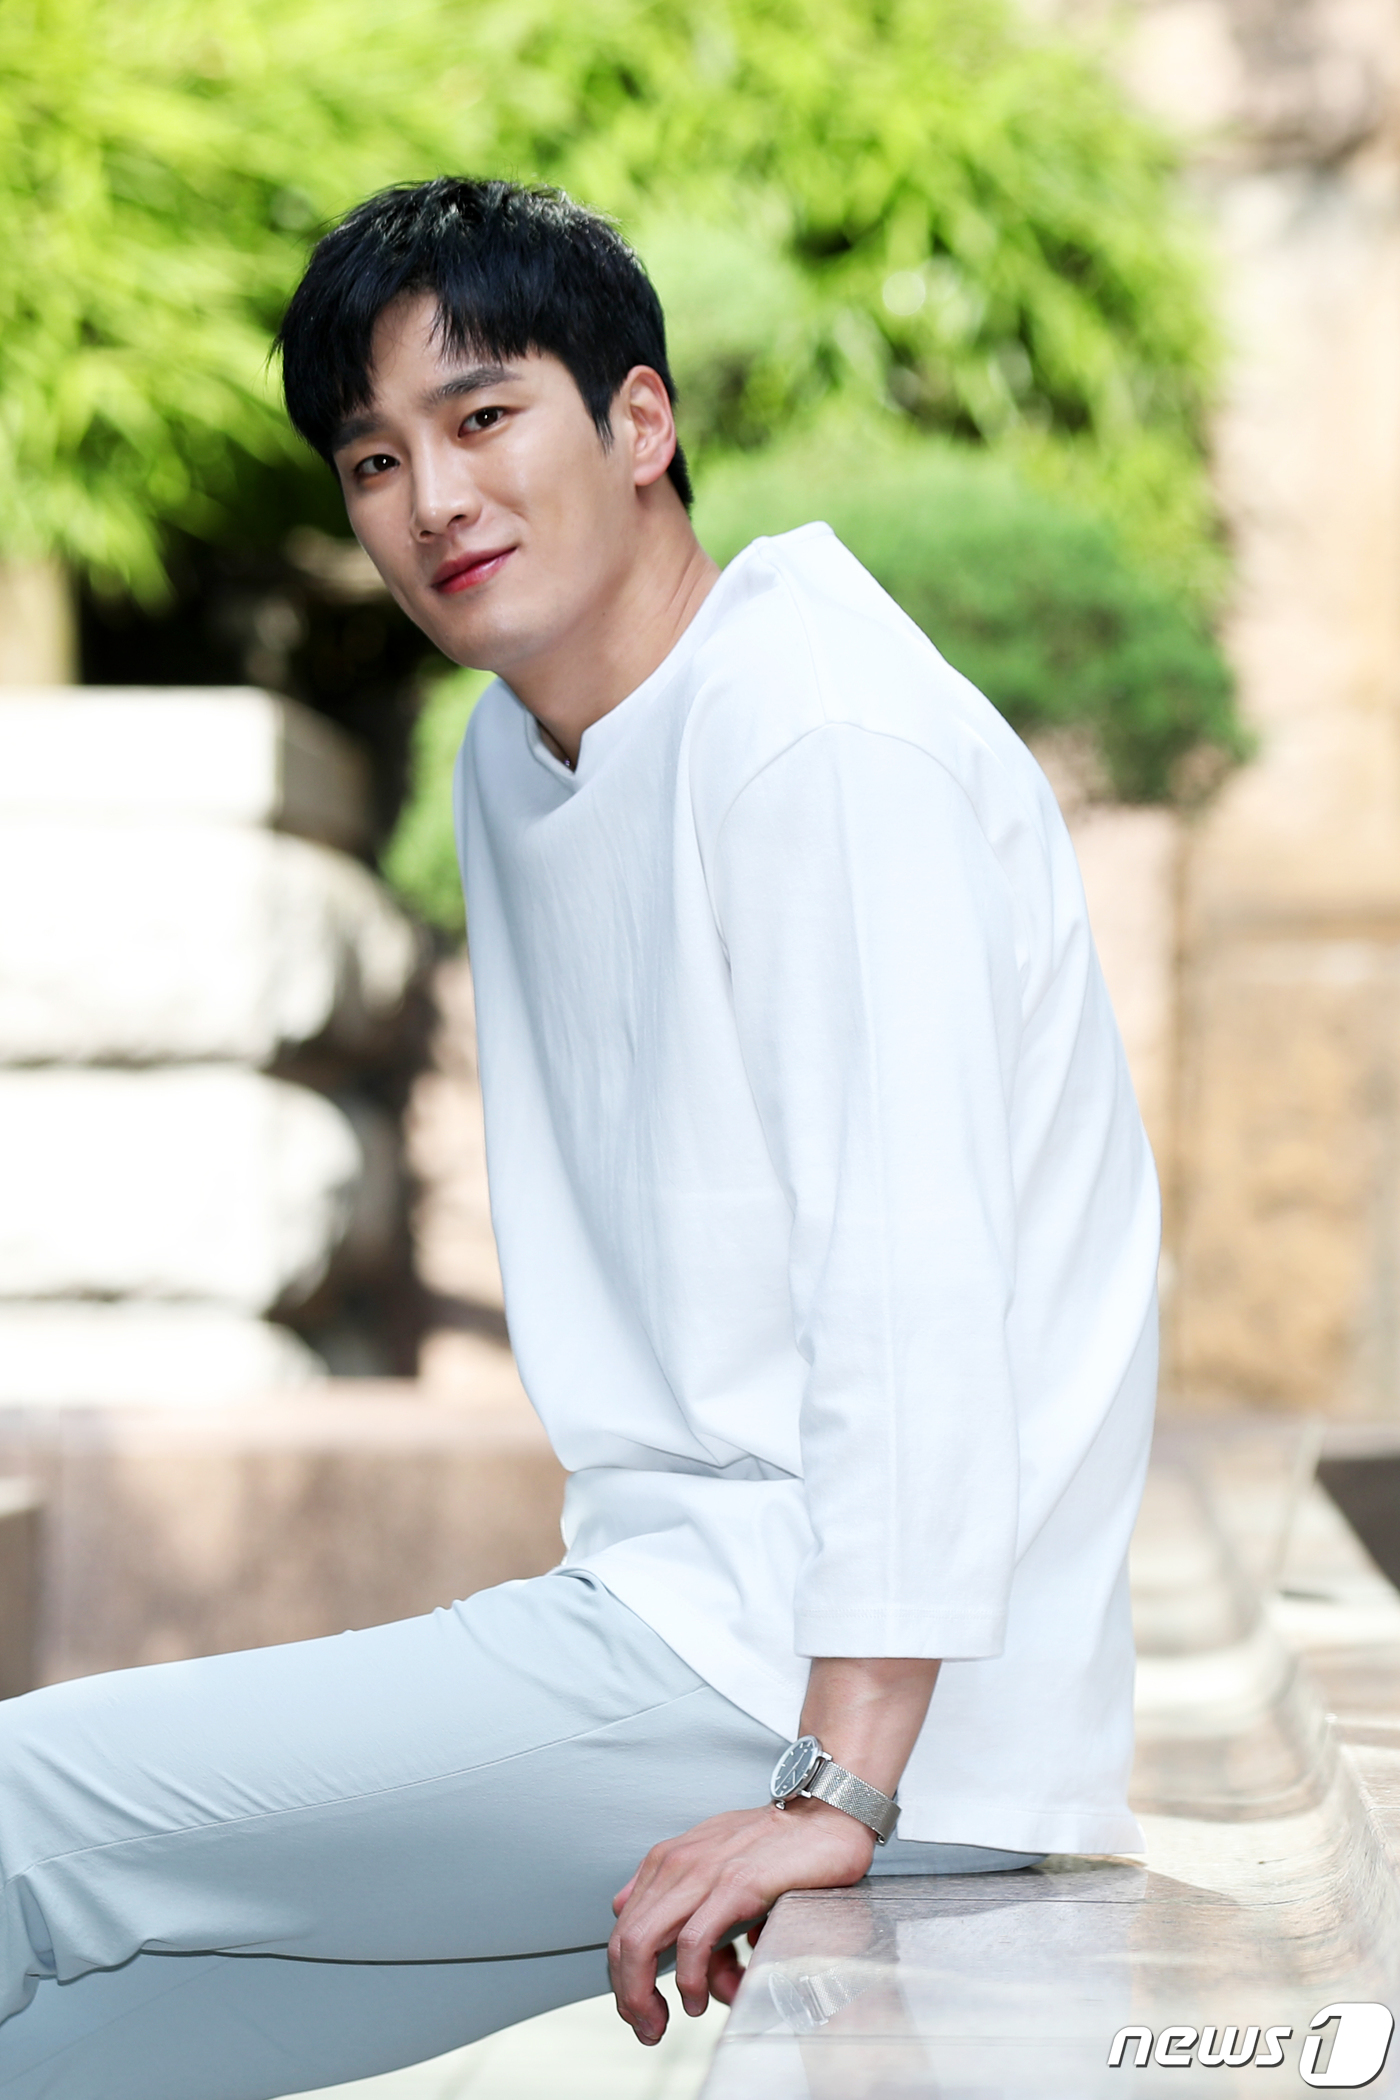 As a result of the 30-day coverage, Ahn Bo-hyun joins JTBCs new gilt drama Itaewonclath (playplayplay by Jo Kwang-jin/directed by Kim Seong-yoon) as Jang Geun-soos role.Itaewon Clath, based on the next webtoon of the same name, is a work that depicts the hip rebellion of youths who are united in an unreasonable world, stubbornness and passenger.It contains the myth of the founding of those who pursue freedom with their own values ​​on the small street of Itaewon.The original work started in 2017 and has a cumulative number of views of 220 million views. With high completion, fans were highly anticipated about drama.He confirmed the production of the drama this year and cast the main characters Park Seo-joon (played by Park Sae), Kim Da-mi (played by Joy Seo) and Yoo Jae-myung (played by Jang Dae-hee).Ahn Bo-hyun plays Jang Geun-won, the eldest son of Jang Dae-hees accident-binding group, who is a figure who is at the opposite end of the game, often facing Park.It is a selfish and heinous successor that causes various conflicts in the drama.Ahn Bo-hyun will continue his Fever Day campaign after confirming his next work without rest following TVN Her Privacy which last May.On the other hand, Itaewon Clath is a work by Kim Seong-yoon, who has been recognized for his sensual performance through Gurmigreen Moonlight and Discovery of Love, and Jo Kwang-jin, who has a lot of fun and deep sympathy with Webtoon Itaewon Clath.It is broadcast according to chocolate.